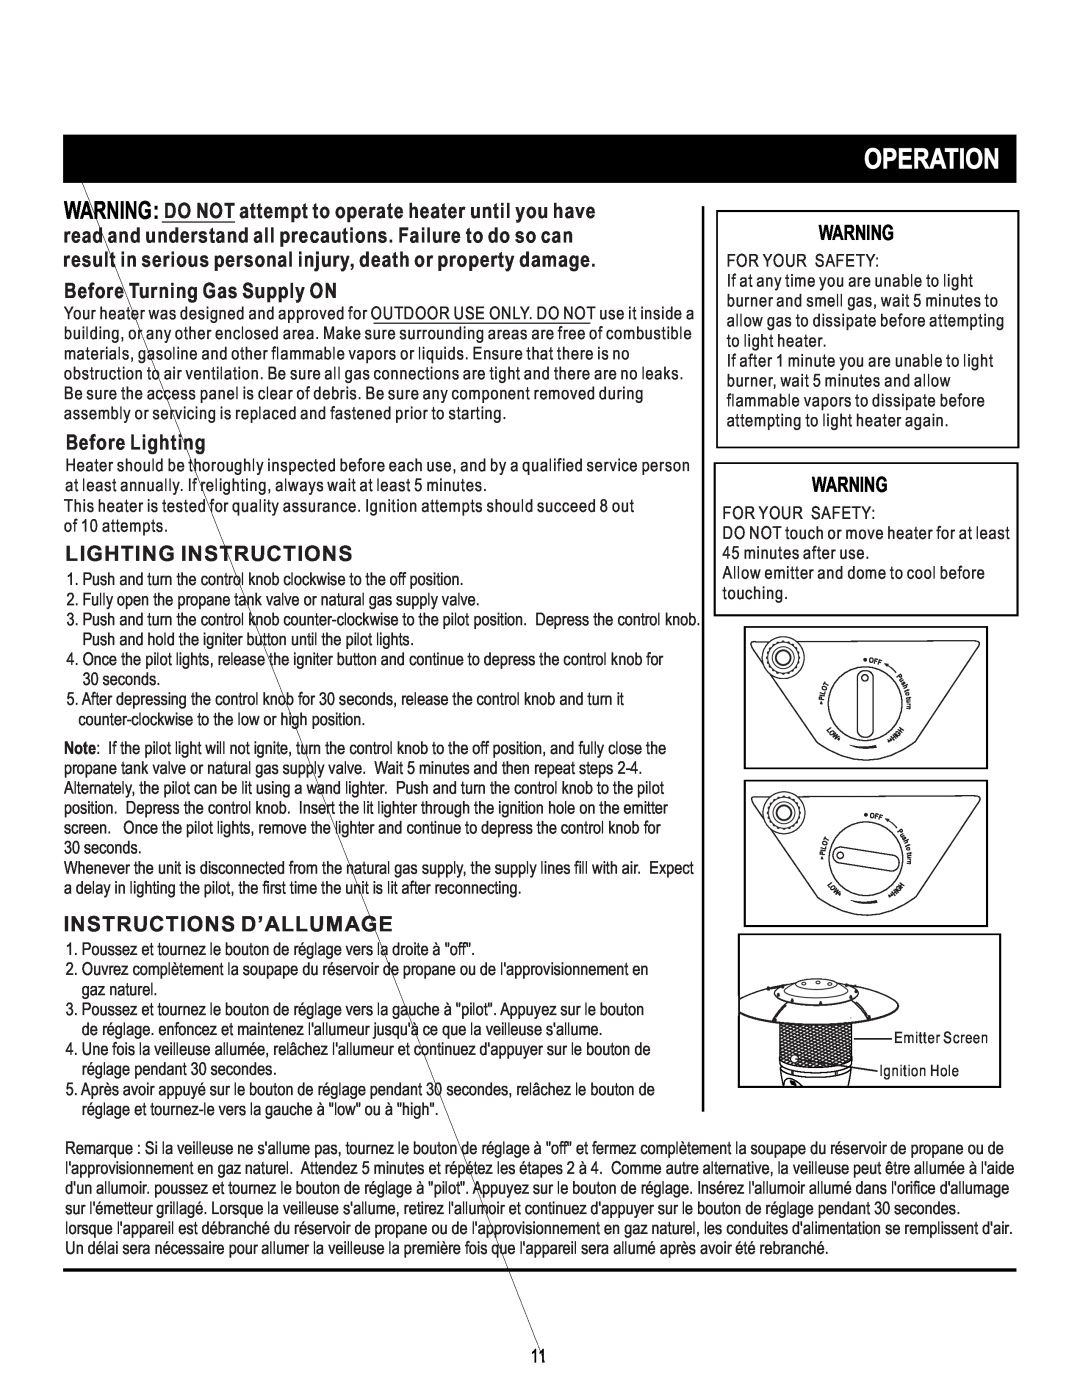 Mr. Heater SRPH02S manual Operation, Before Turning Gas Supply ON, Before Lighting, Lighting Instructions 